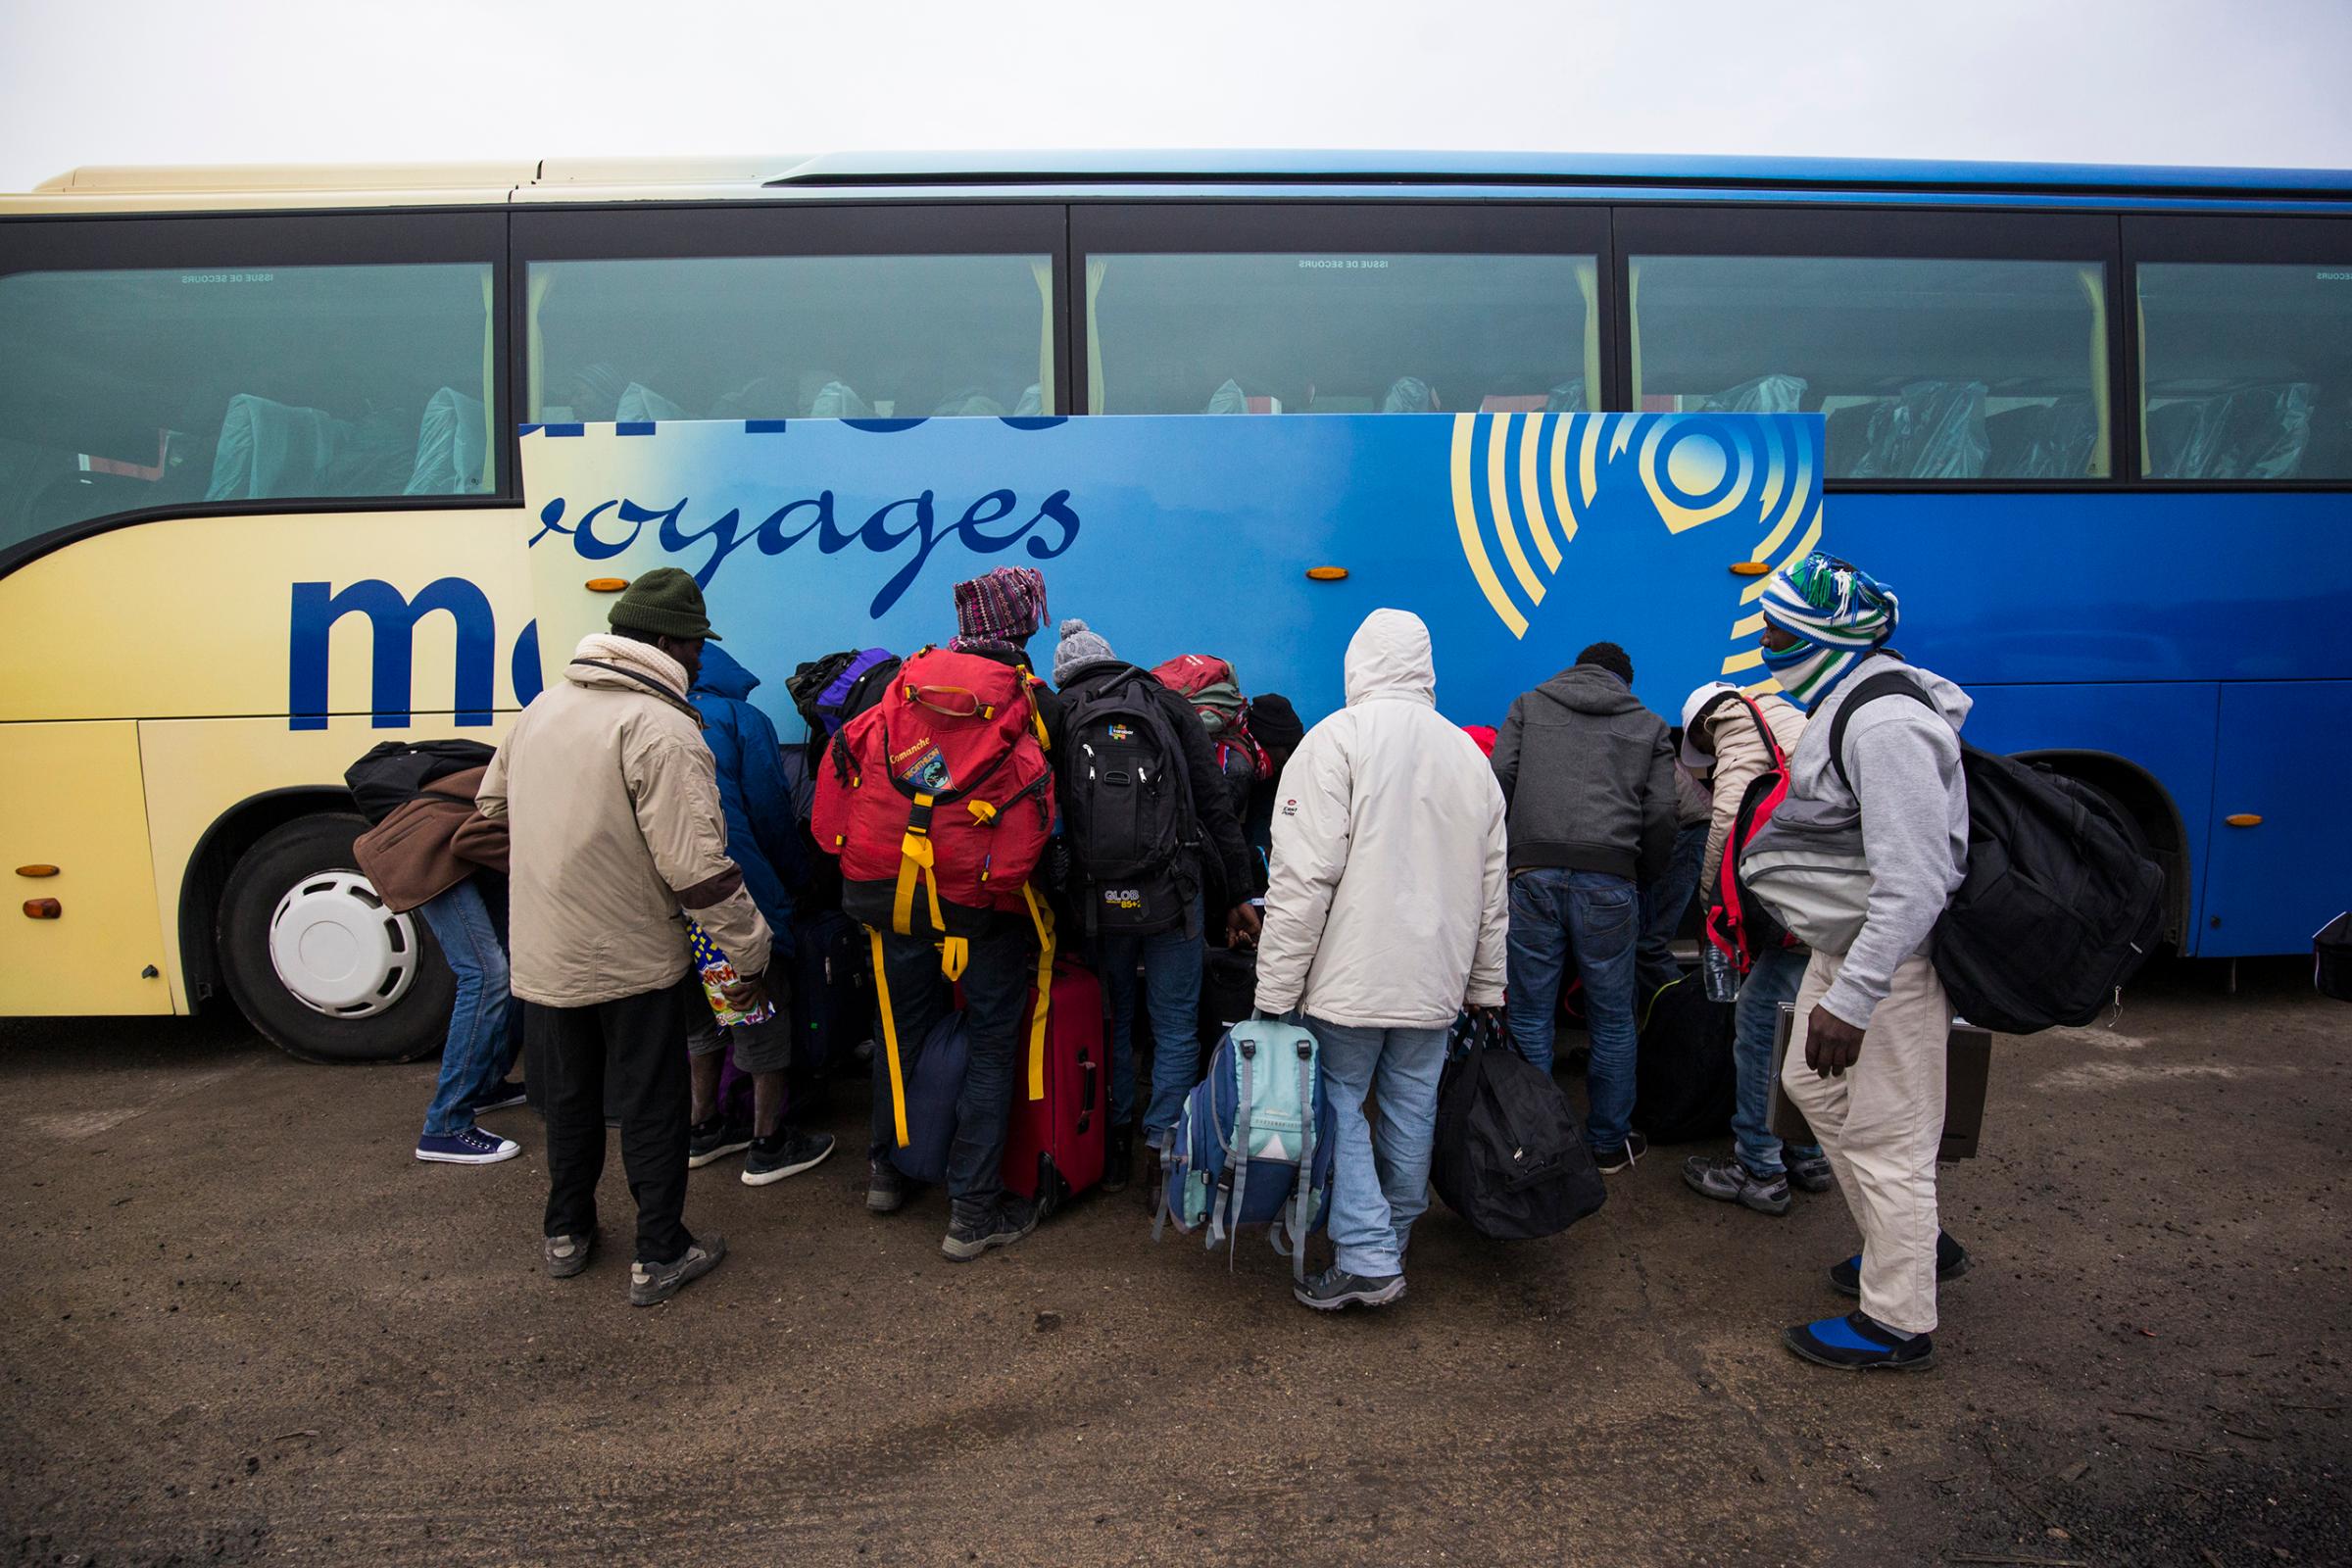 Migrants board buses outside the "Jungle" migrant camp dismantled this week by authorities, headed to refugee centers around France, at a reception point in Calais on Oct. 24, 2016.